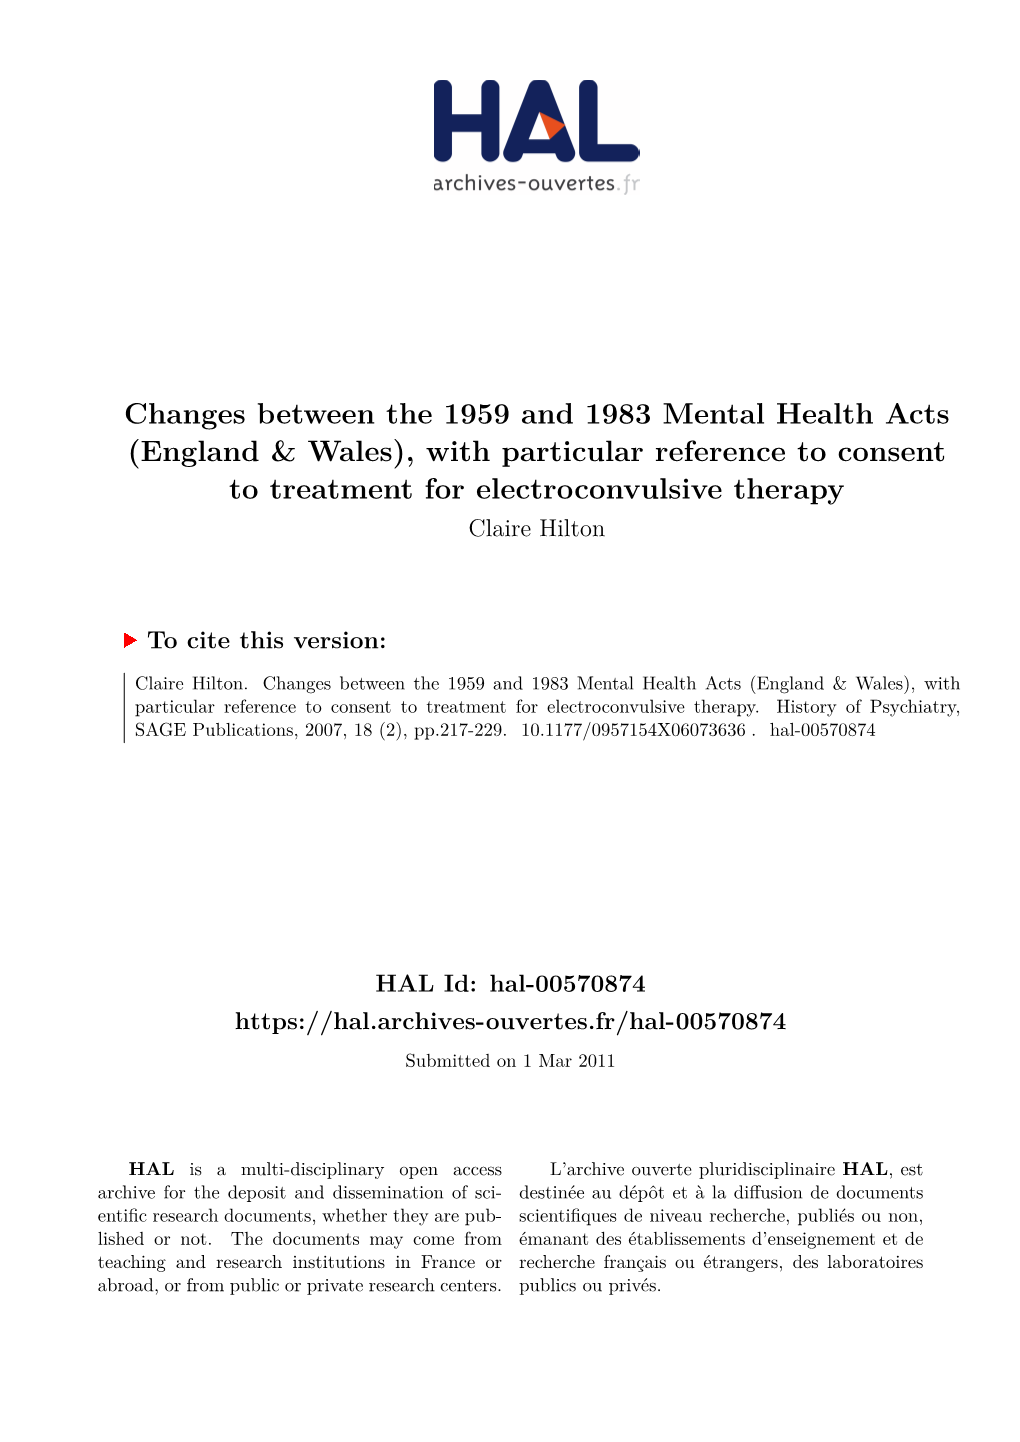 Changes Between the 1959 and 1983 Mental Health Acts (England & Wales), with Particular Reference to Consent to Treatment for Electroconvulsive Therapy Claire Hilton